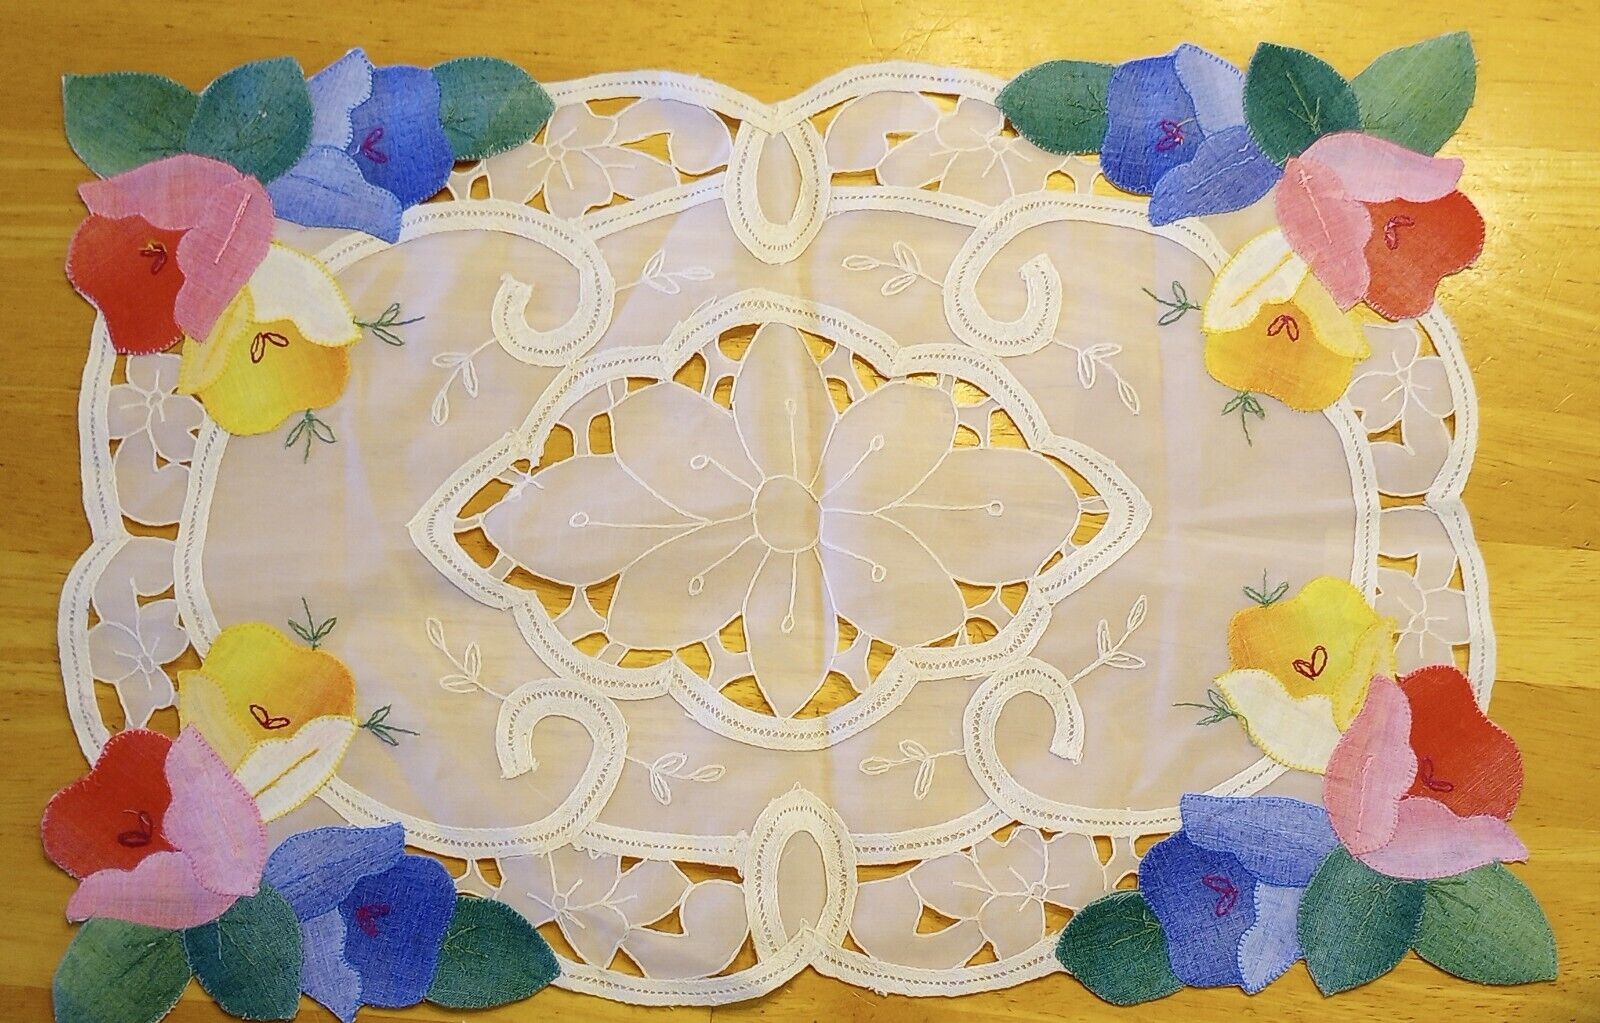 Off White Cut Work Doily Sheer Tulips Embroidery Applique Flower Placemat Spring